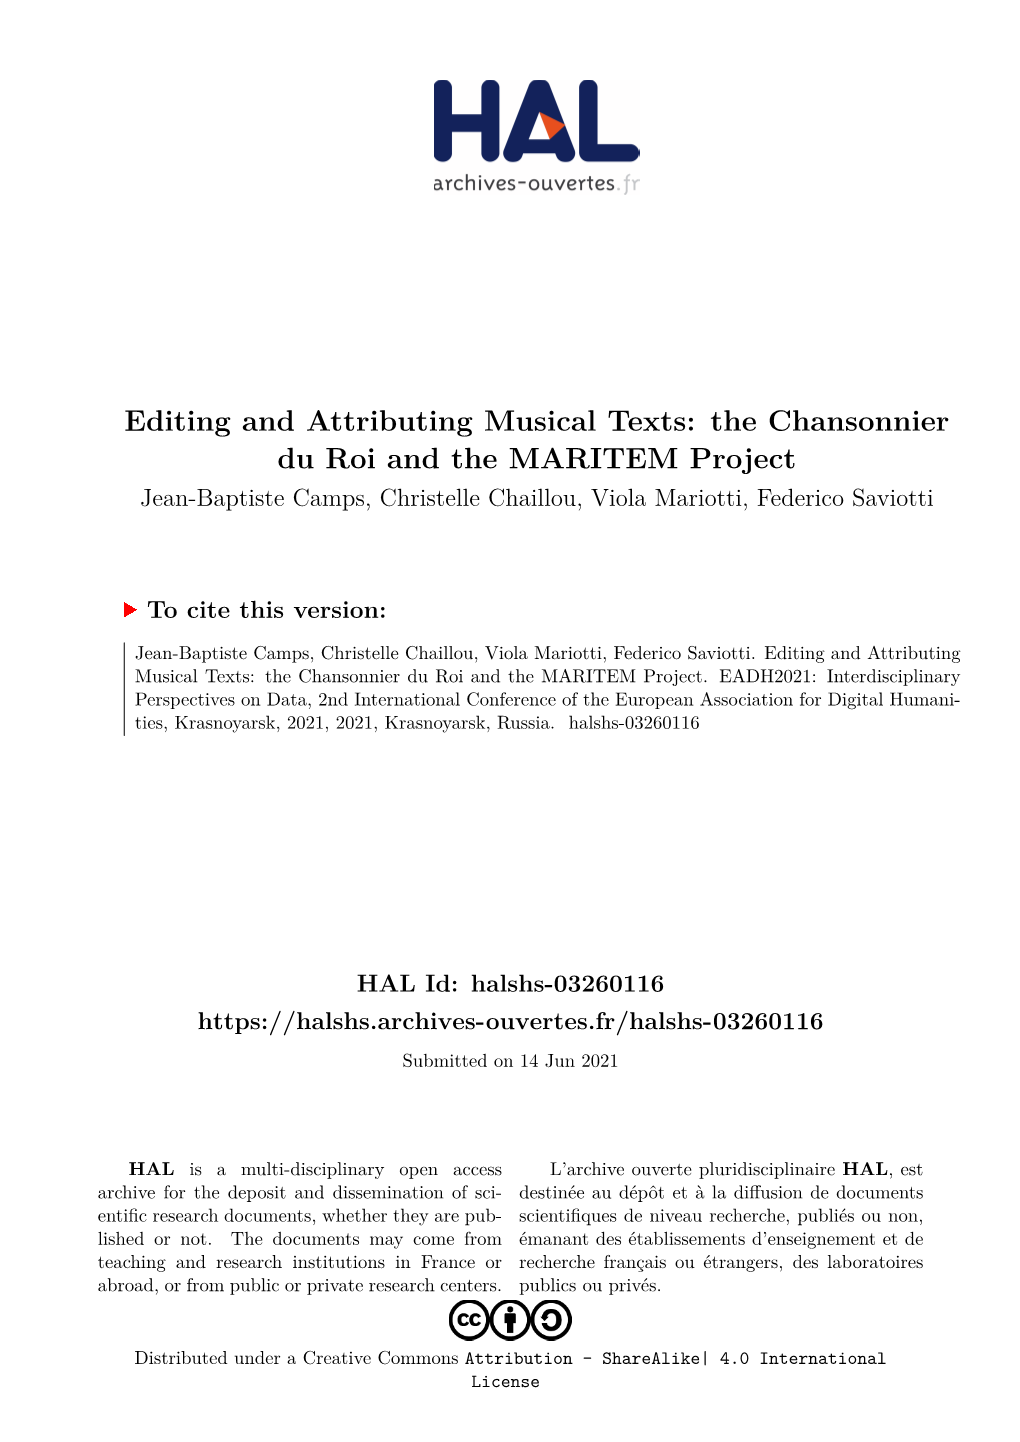 Editing and Attributing Musical Texts: the Chansonnier Du Roi and the MARITEM Project Jean-Baptiste Camps, Christelle Chaillou, Viola Mariotti, Federico Saviotti